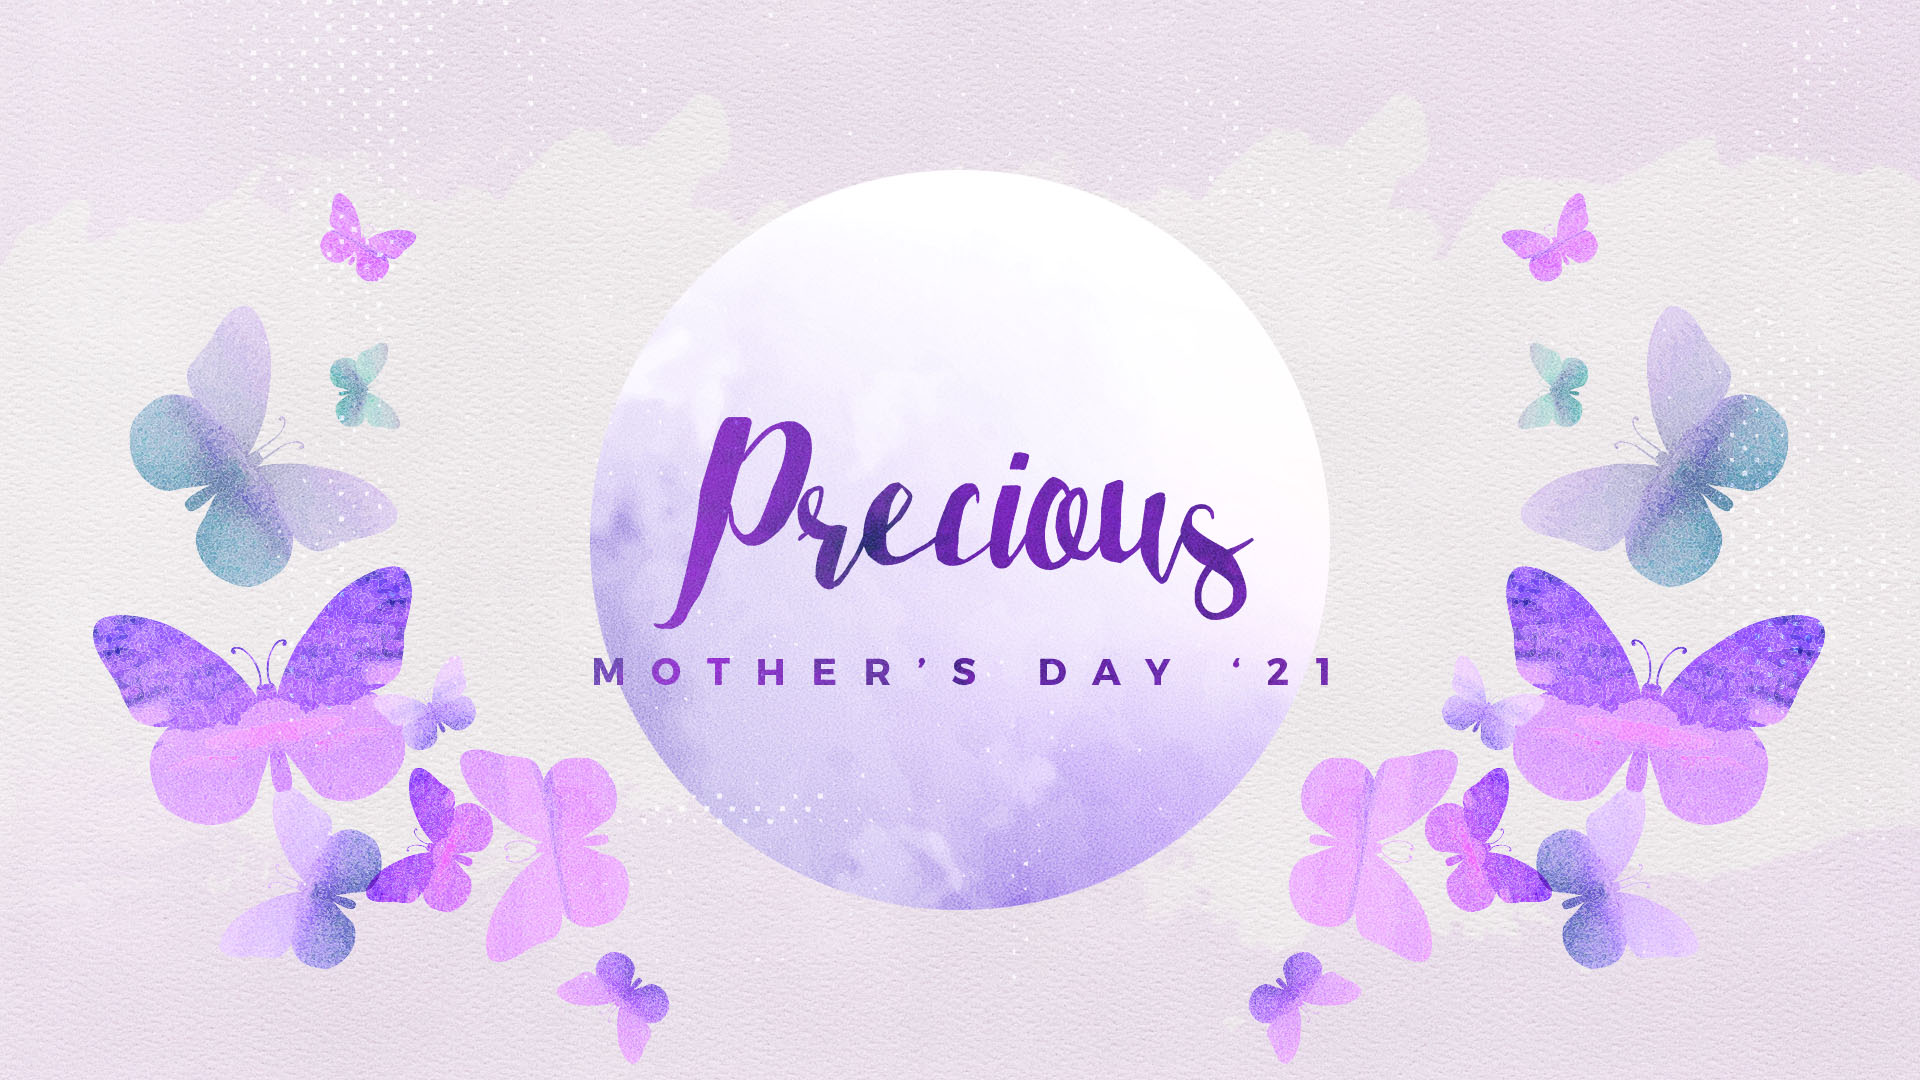 "Precious: Mother's Day '21" Message